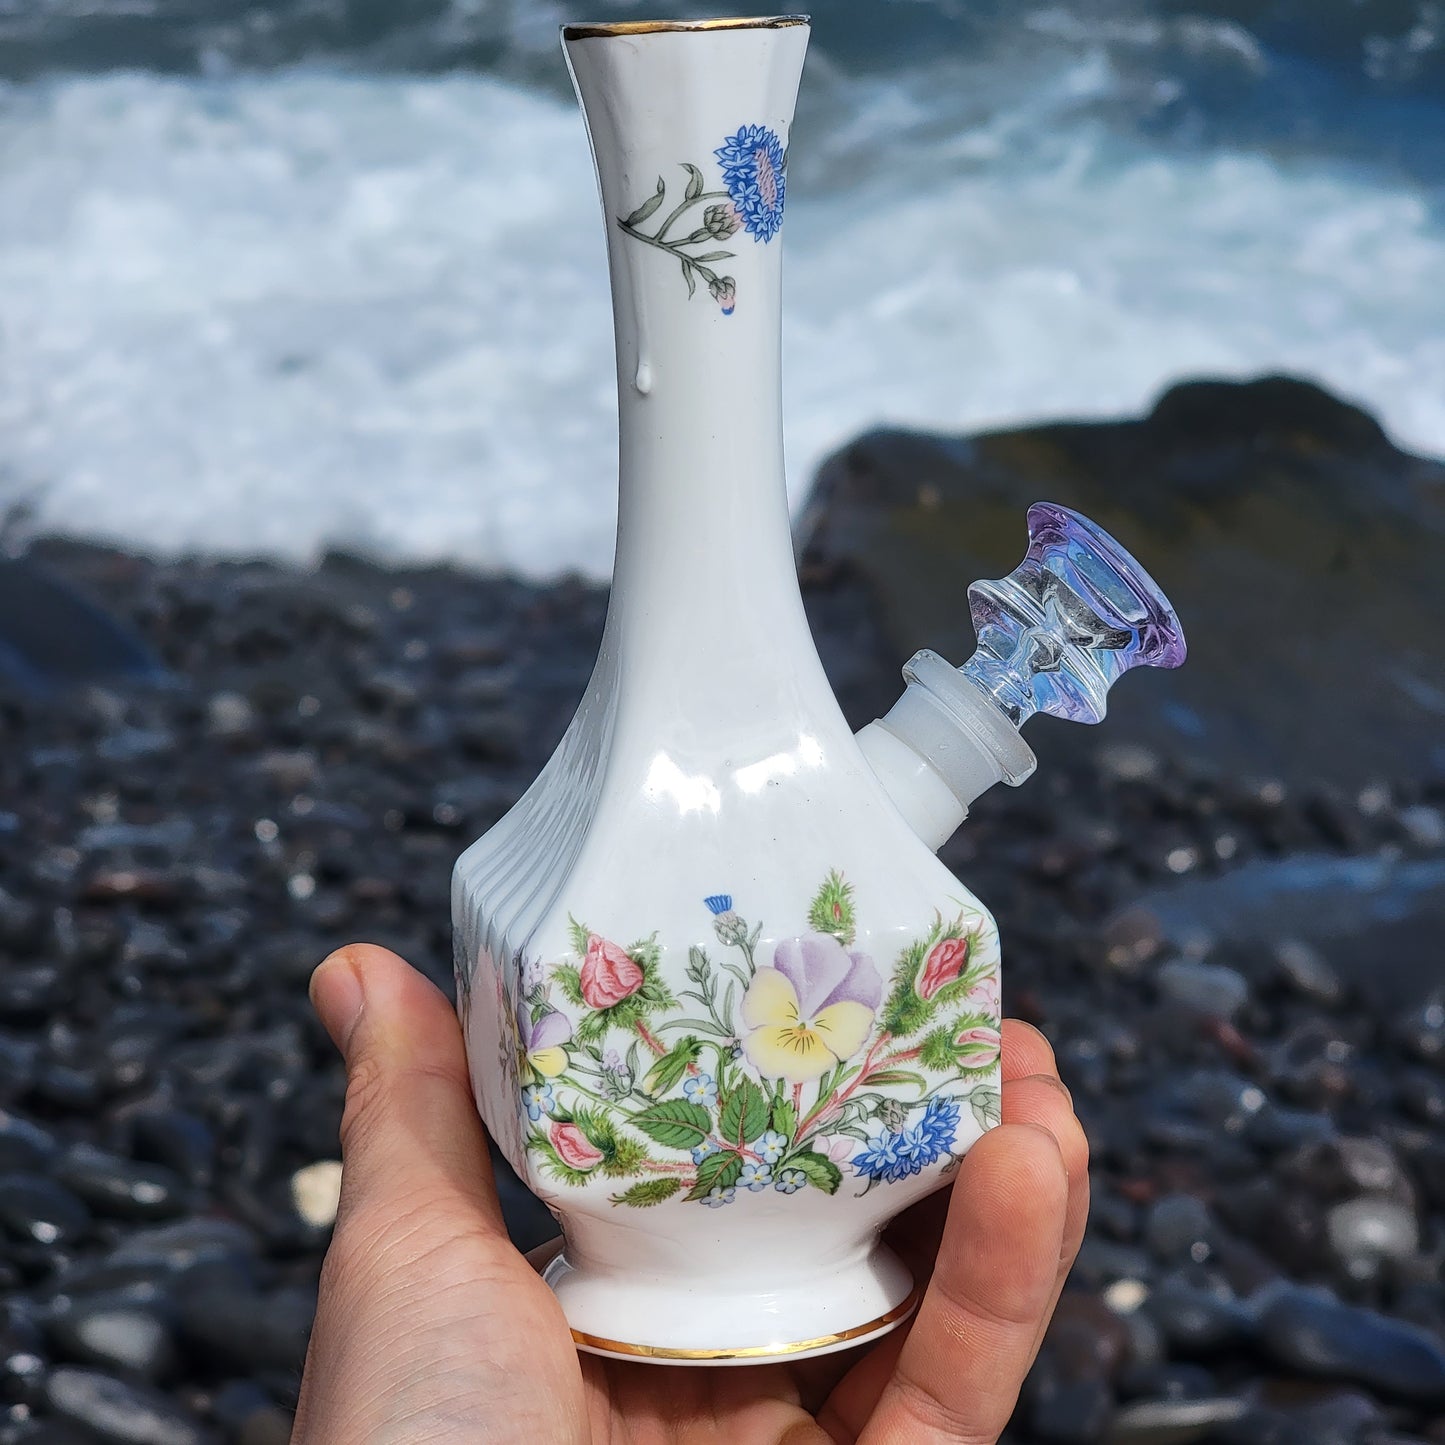 "Wild Bloom" Vintage China Upcycled Vase Bong with Gilded Details